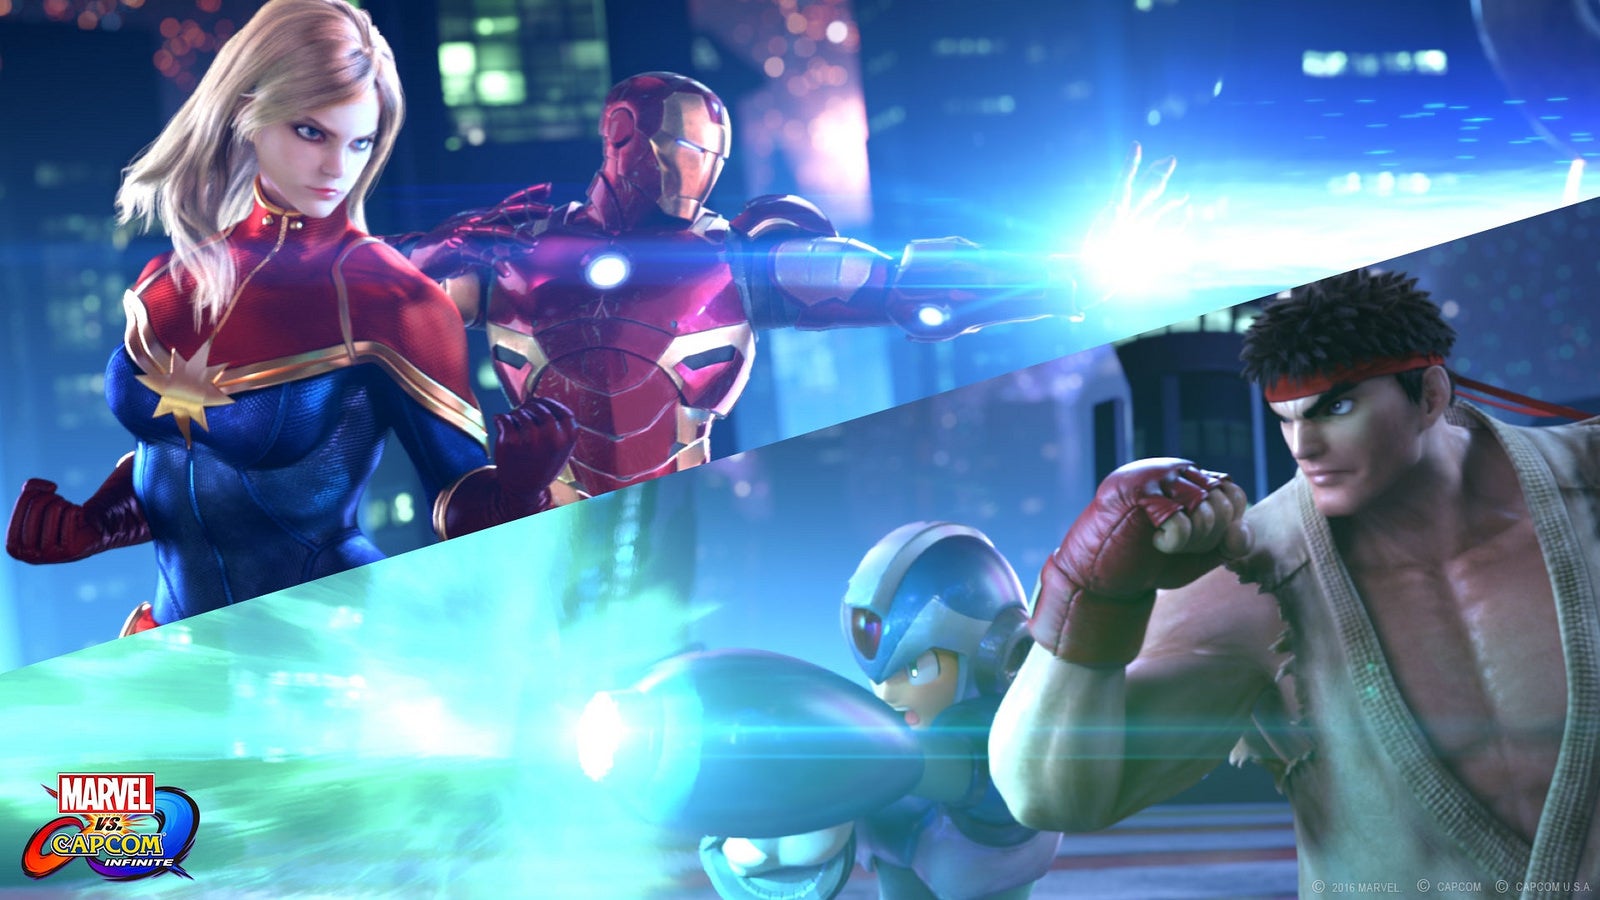 Image for Marvel vs Capcom Infinite review: frantic, fun and with enormous competitive potential - but boy, it feels cheap